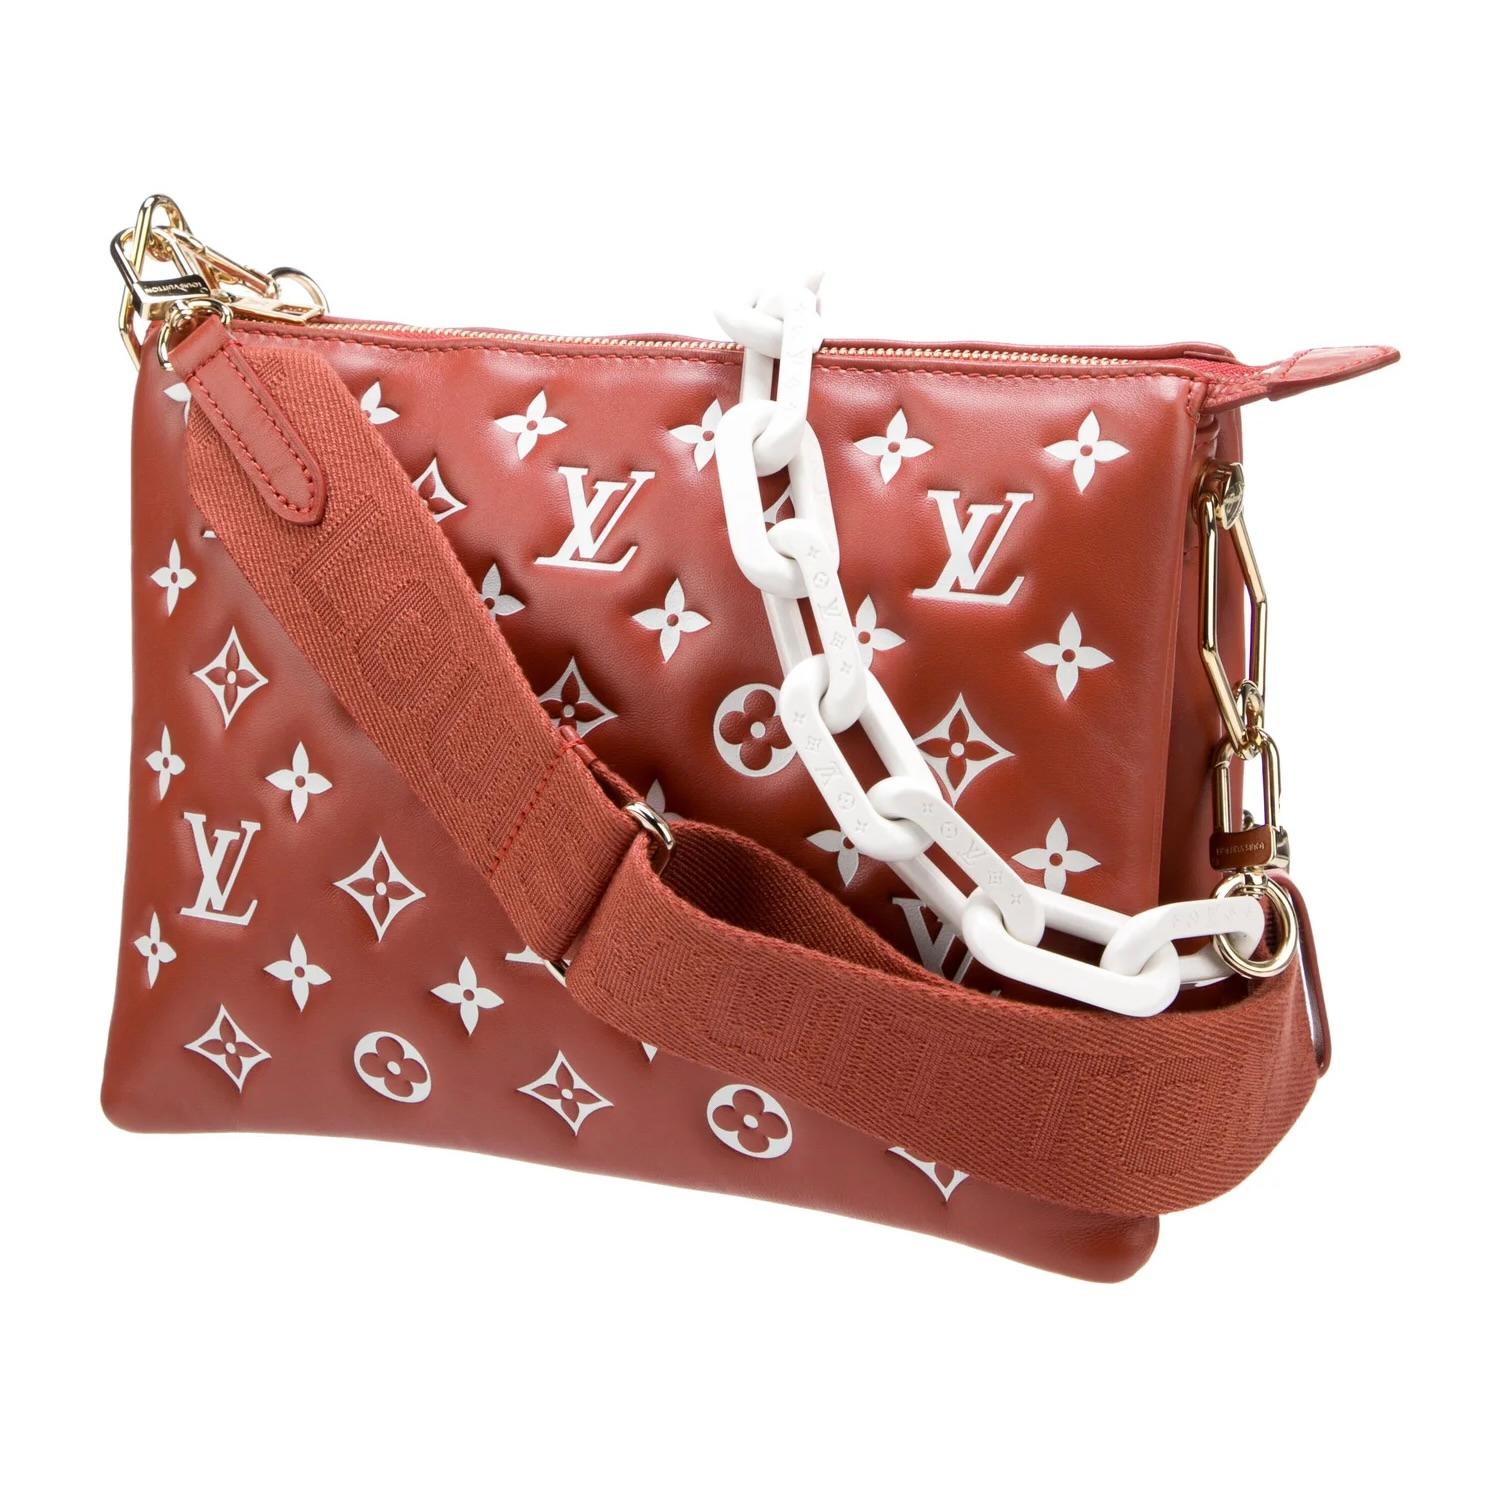 This bag if from Louis Vuitton's Autumn/Winter 2022 collection, where iconic logo prints take center stage, exemplified in this crossbody bag. The bag is made of soft and supple lambskin leather in red with white monogram imprint. Carry it with a